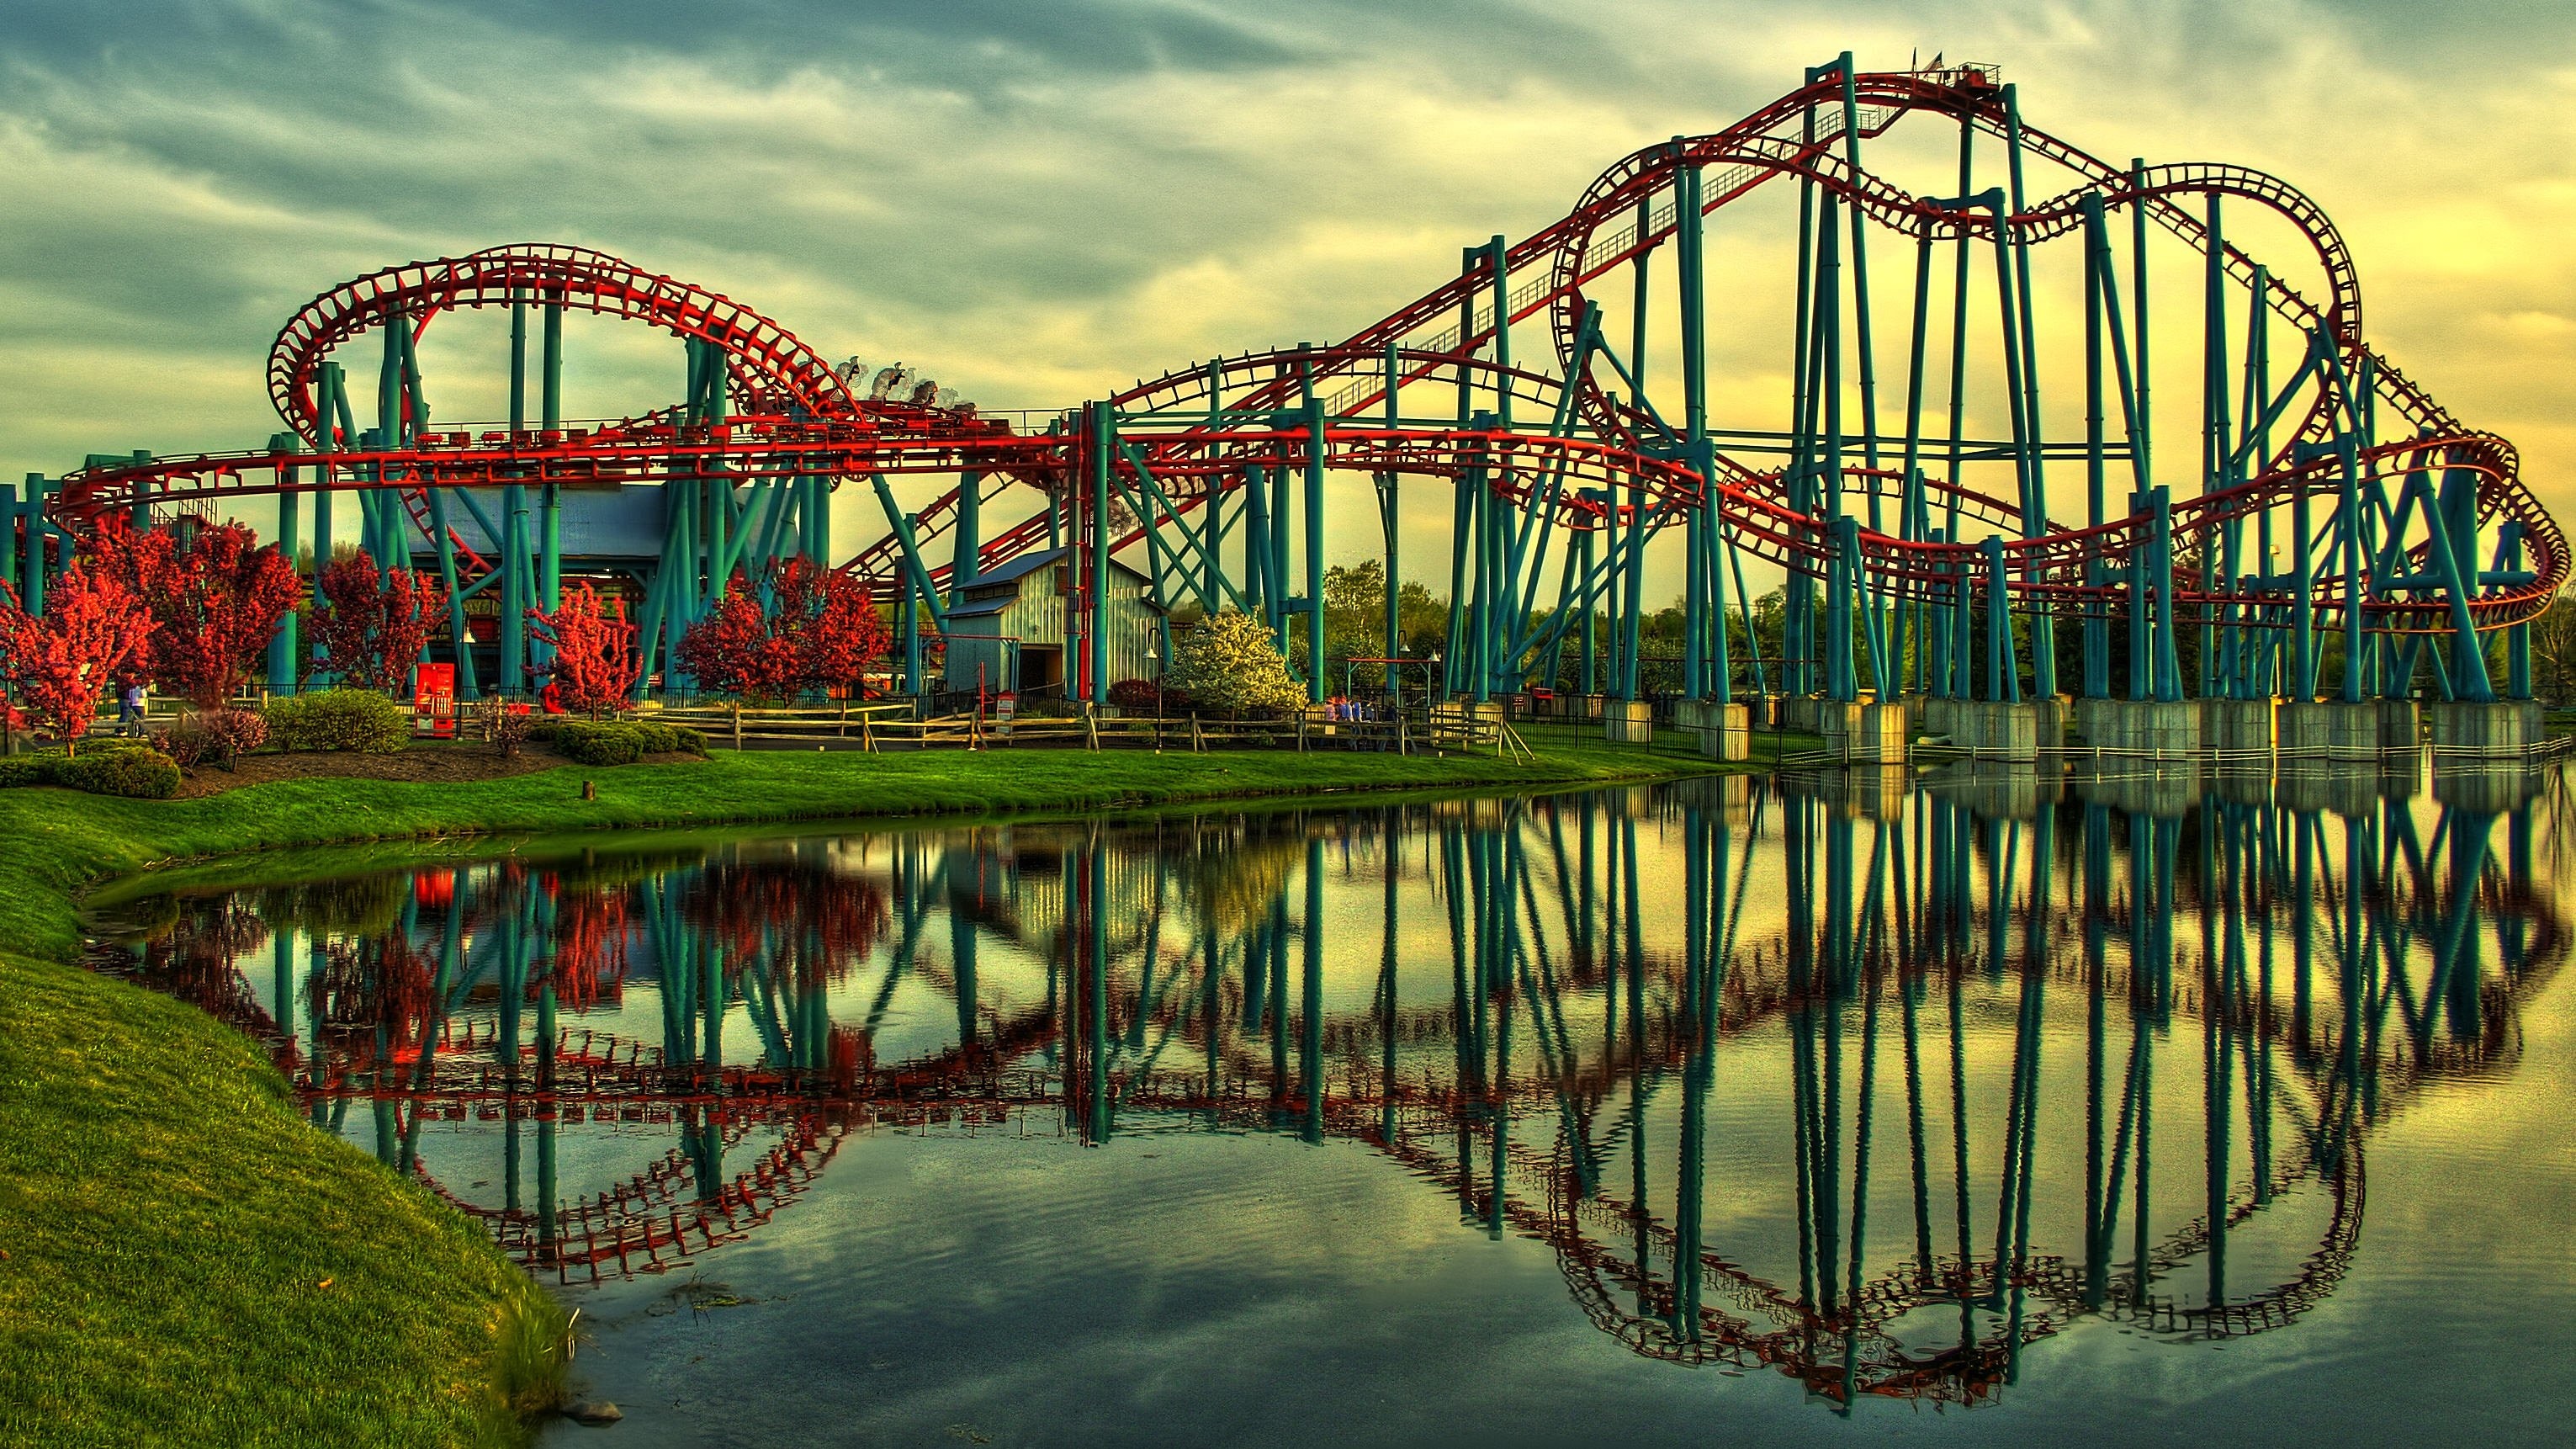 Amusement Park: Roller coaster, A place to enjoy rides, and other activities. 3070x1730 HD Background.